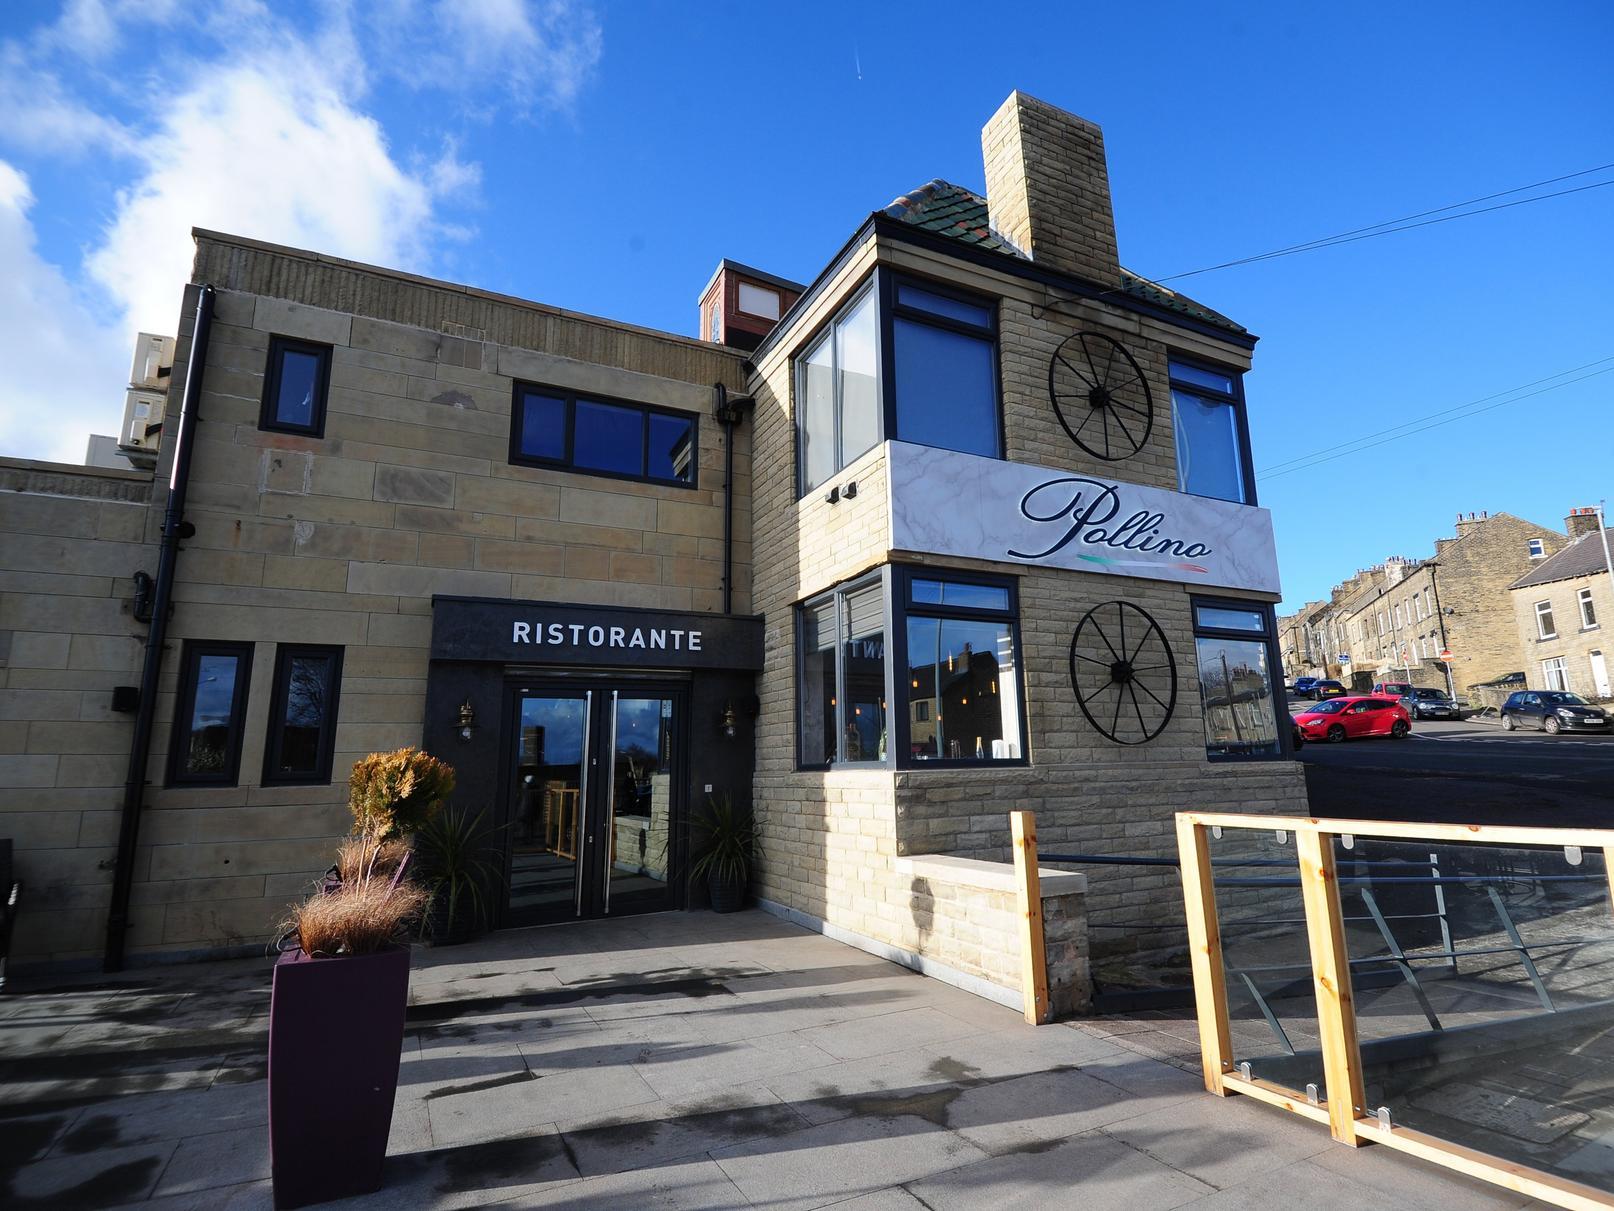 Located in King Cross, this Italian restaurant features stunning views over the Calder Valley. The dishes that are on offer are a mix between classic recipes and new-age kitchen adventures.